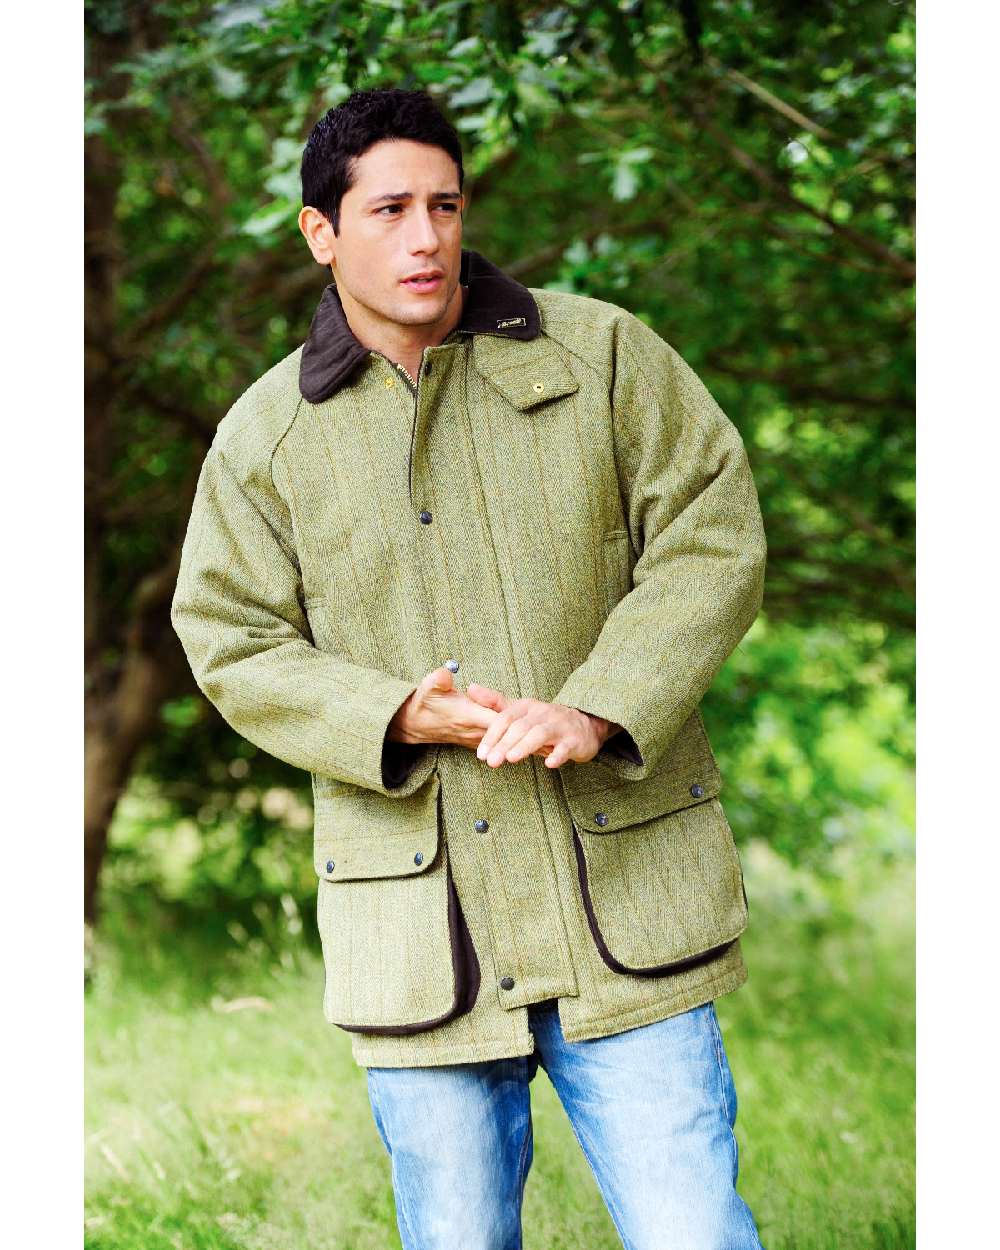 Bronte Derby Tweed Shooting Jacket in Light Green with Check 